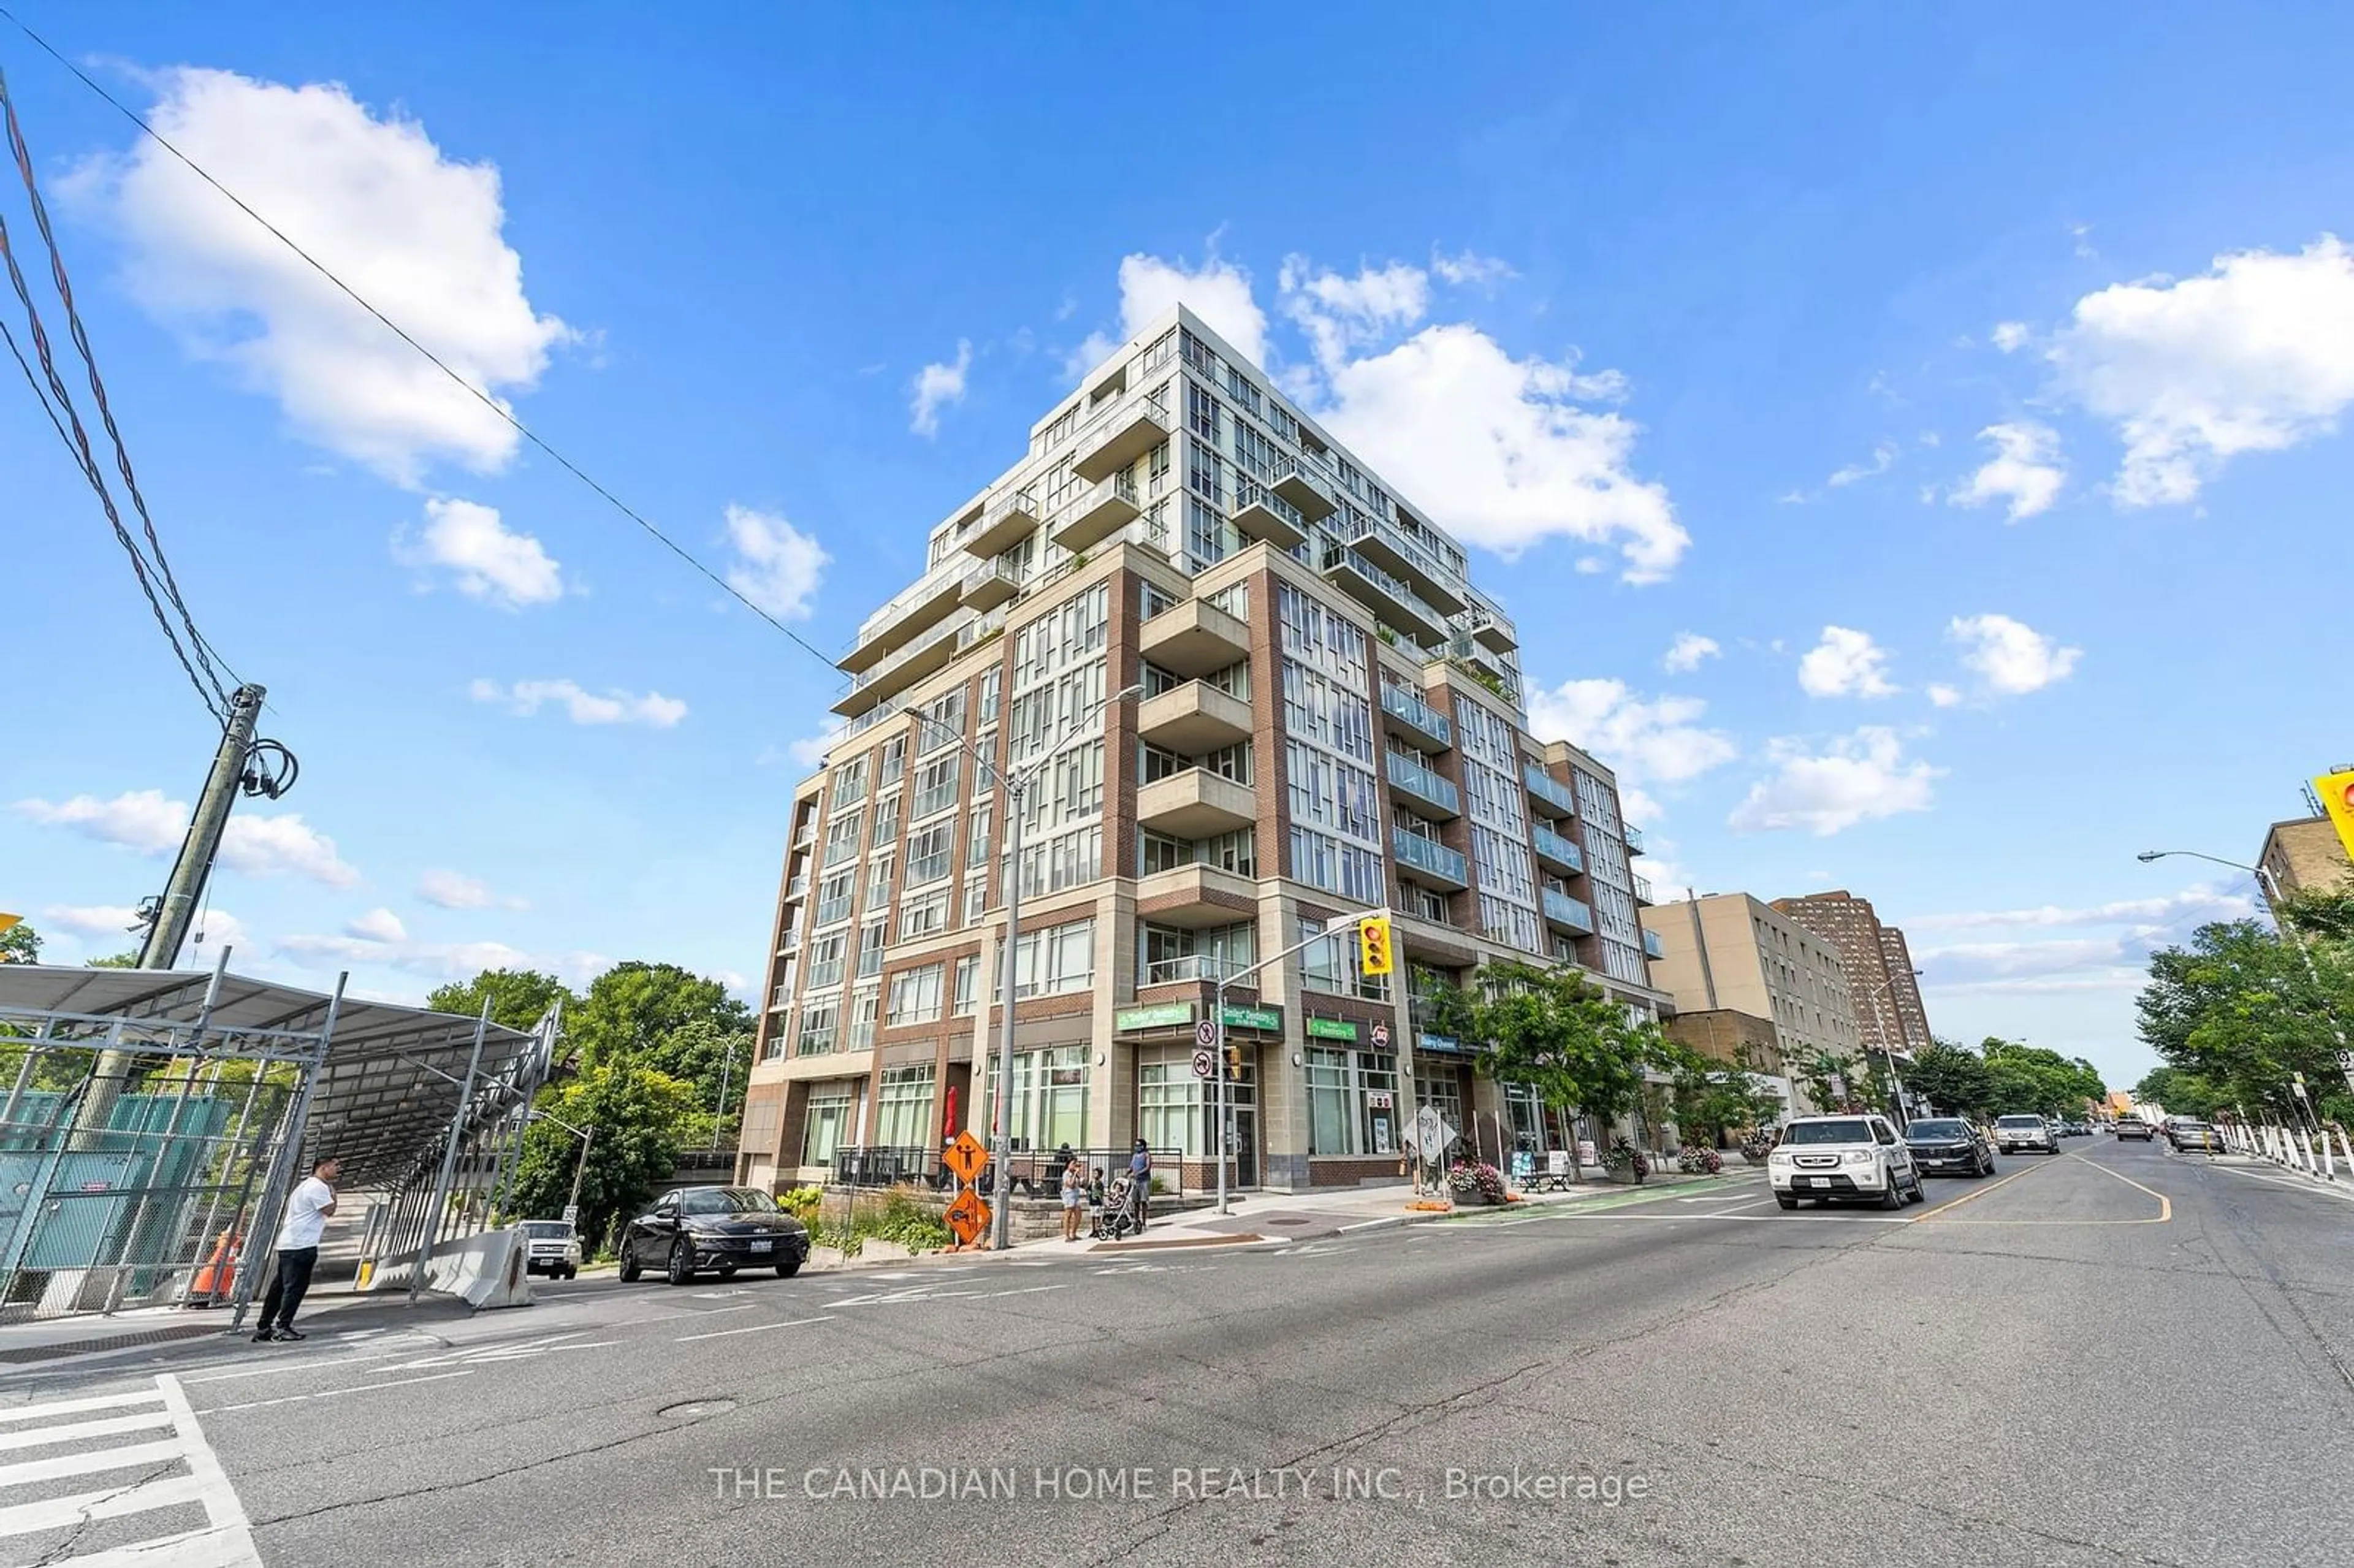 A pic from exterior of the house or condo for 1638 Bloor St #1003, Toronto Ontario M6P 0A6